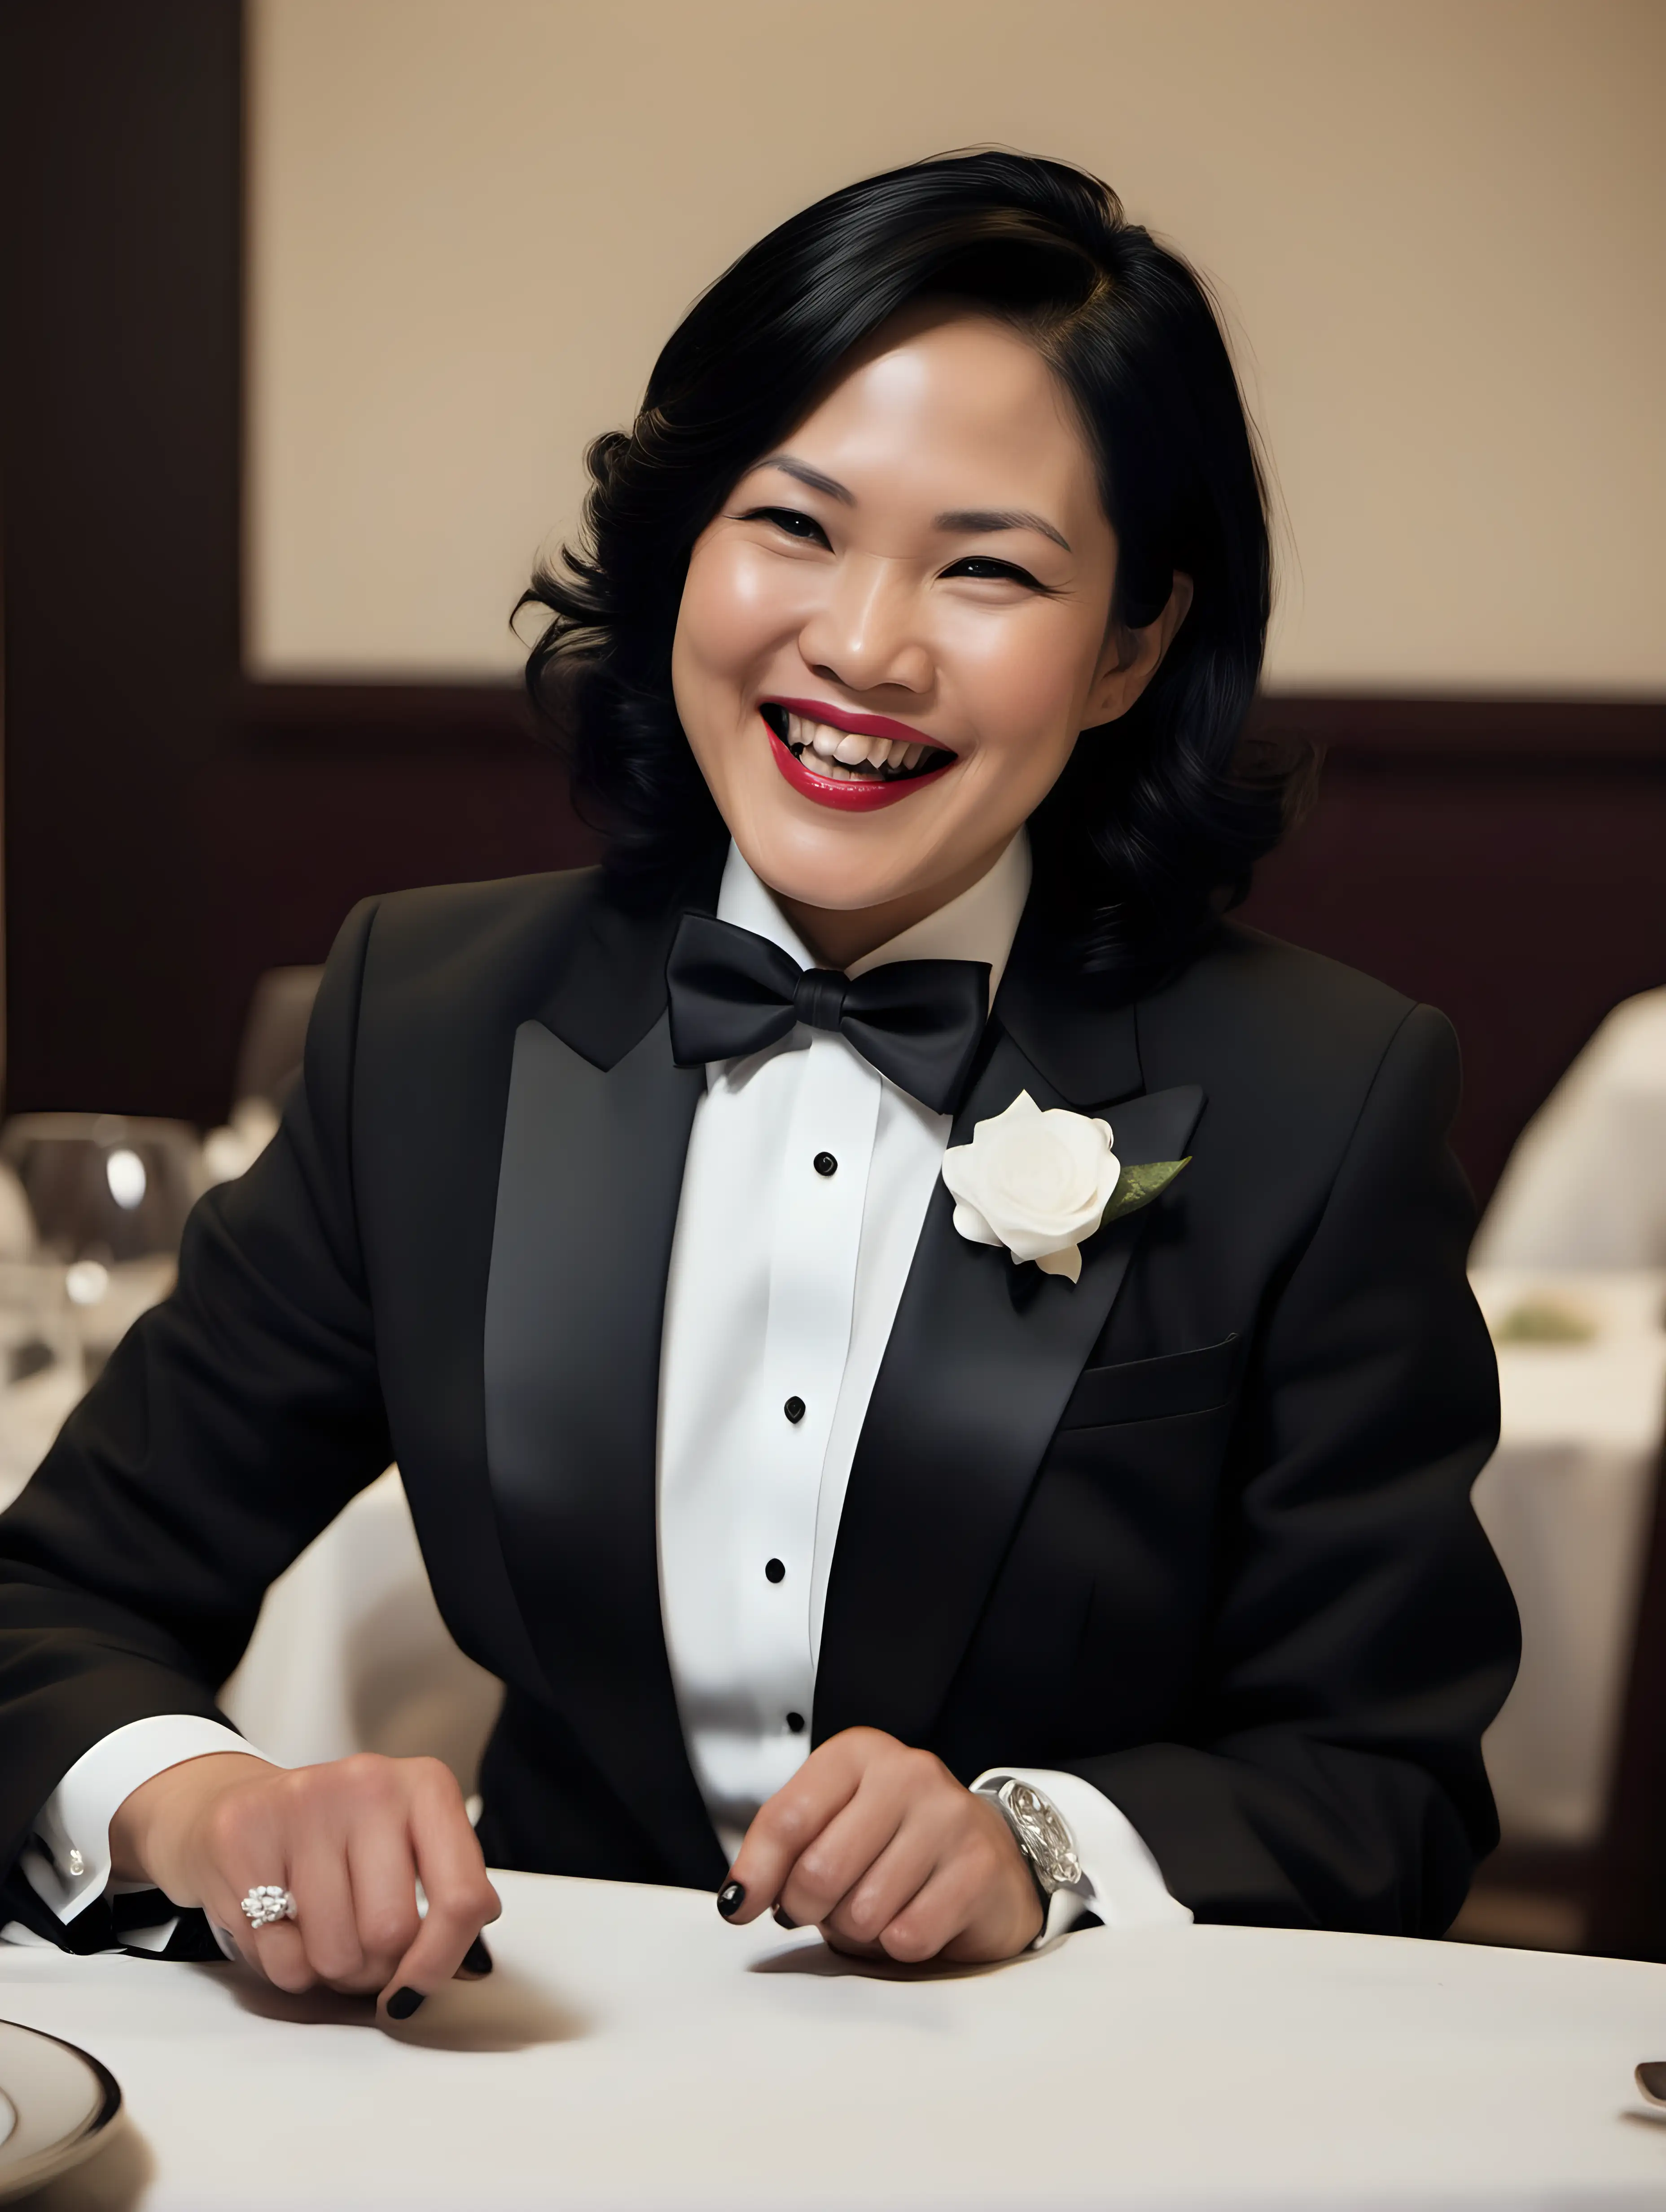 40 year old Vietnamese woman with black shoulder length hair and lipstick wearing a tuxedo with a black bow tie and big black cufflinks. Her jacket has a corsage. Her shirt had double French cuffs.  She is sitting at a dinner table.  She is smiling and giggling. Medium shot.  Best quality.